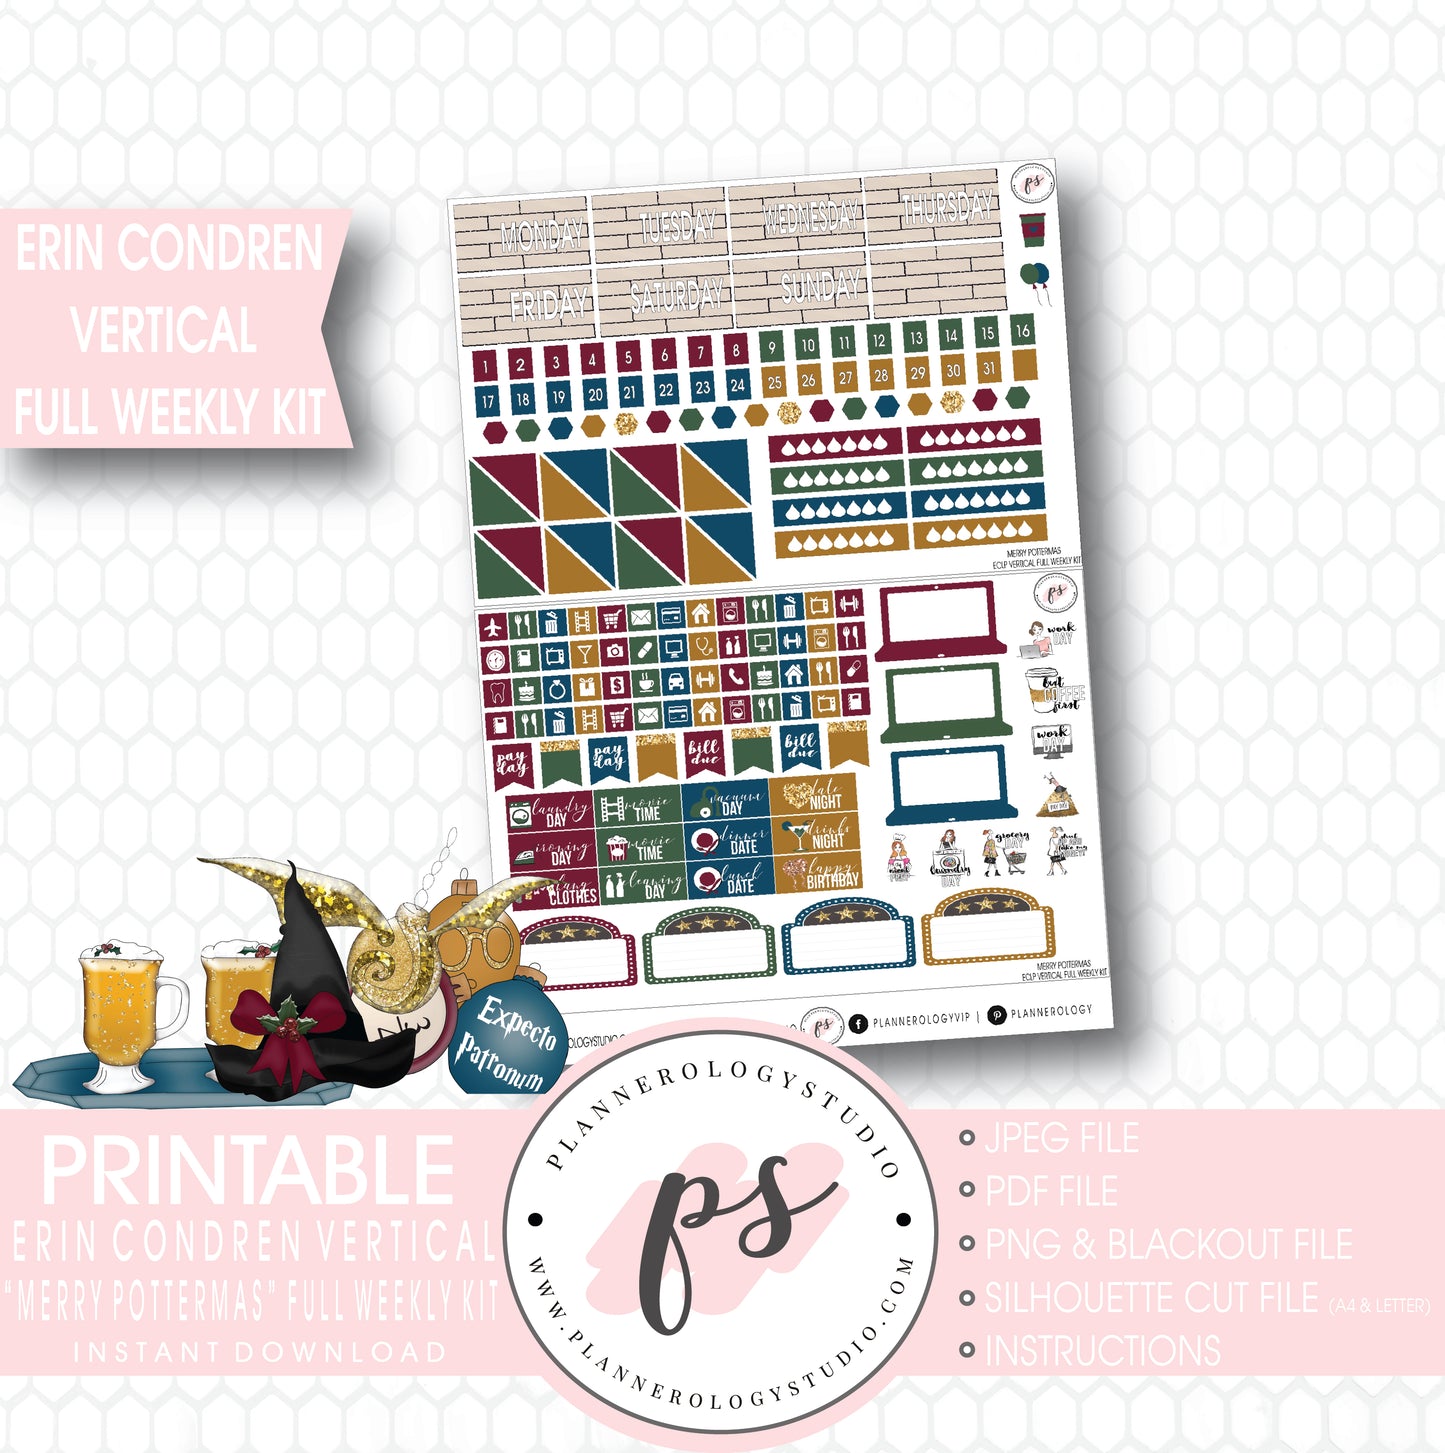 Merry Pottermas (Harry Potter) Christmas Full Weekly Kit Printable Planner Digital Stickers (for use with Erin Condren Vertical) - Plannerologystudio